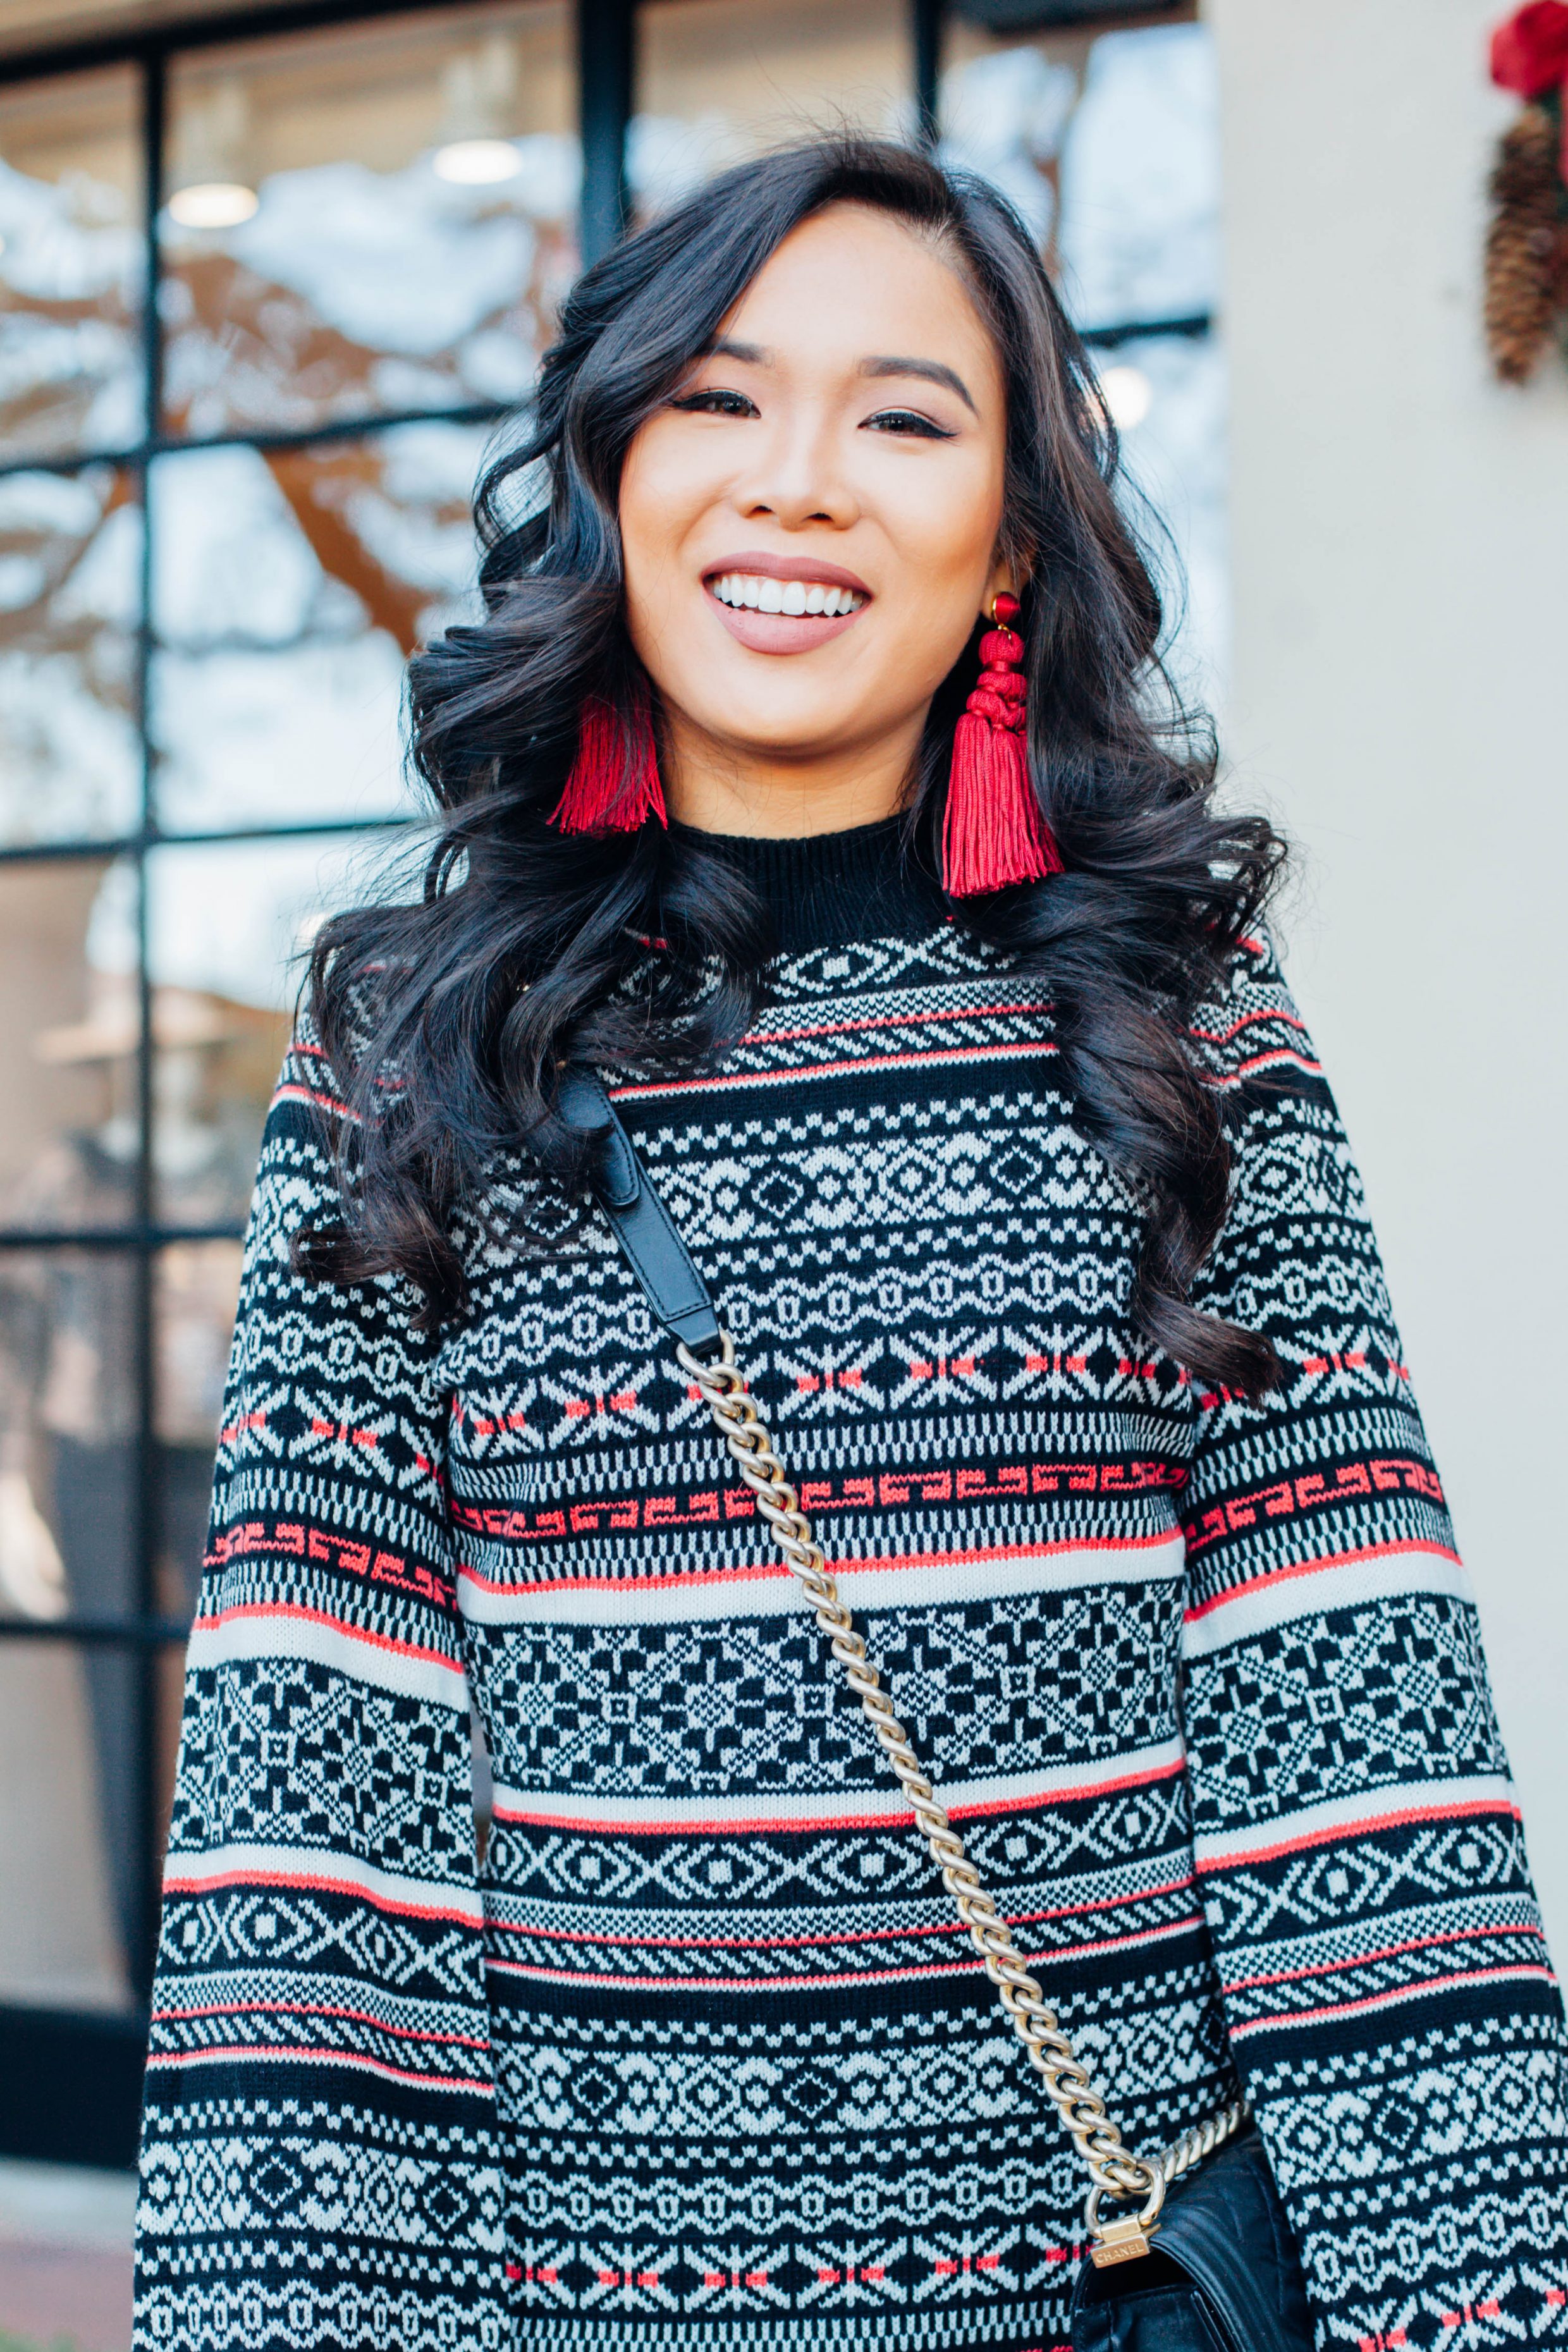 Fair Isle sweater dress with over the knee boots and red tassel earrings